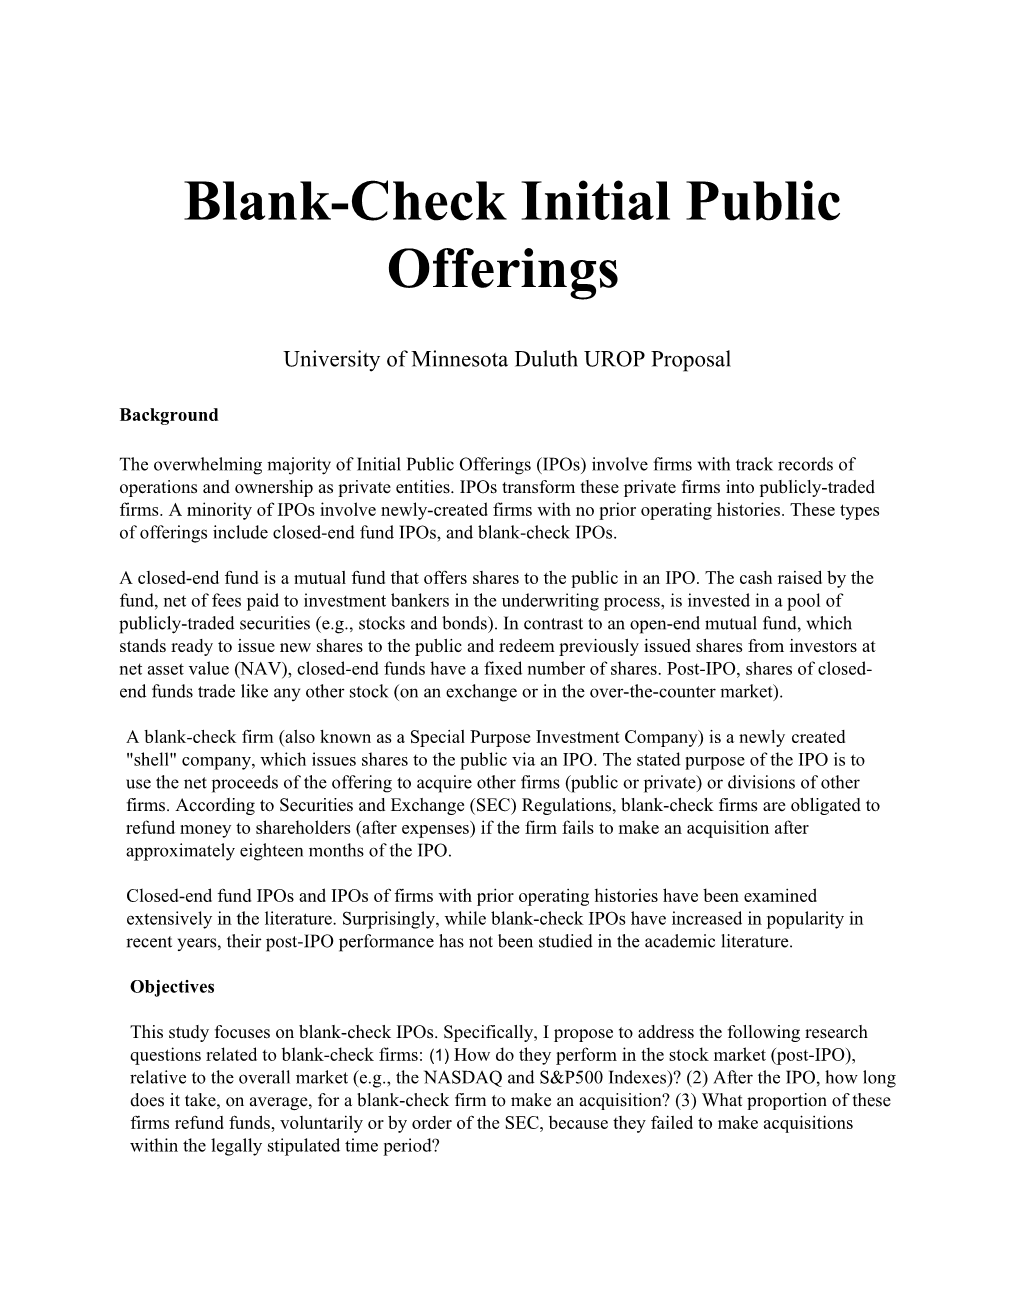 Blank-Check Initial Public Offerings